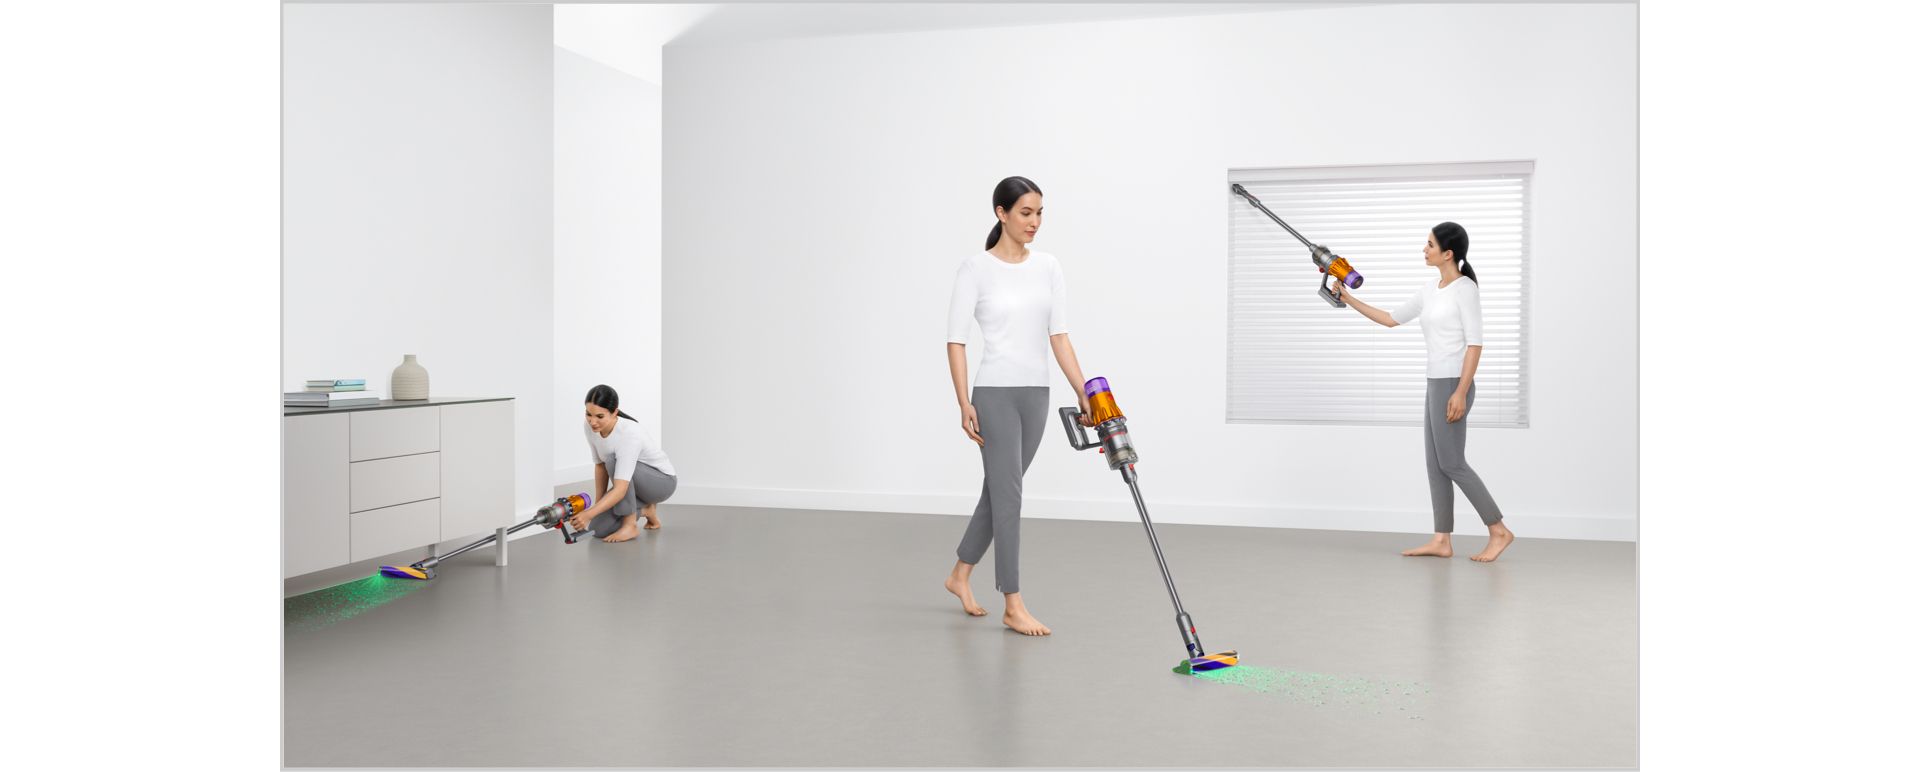  Dyson V12 Detect Slim Absolute Cordless Vacuum Cleaner -  Yellow, HEPA Filter, Up to 60 Min Runtime, LCD Screen Displays, 2-Year  Warranty, with MTC Microfiber Cloth